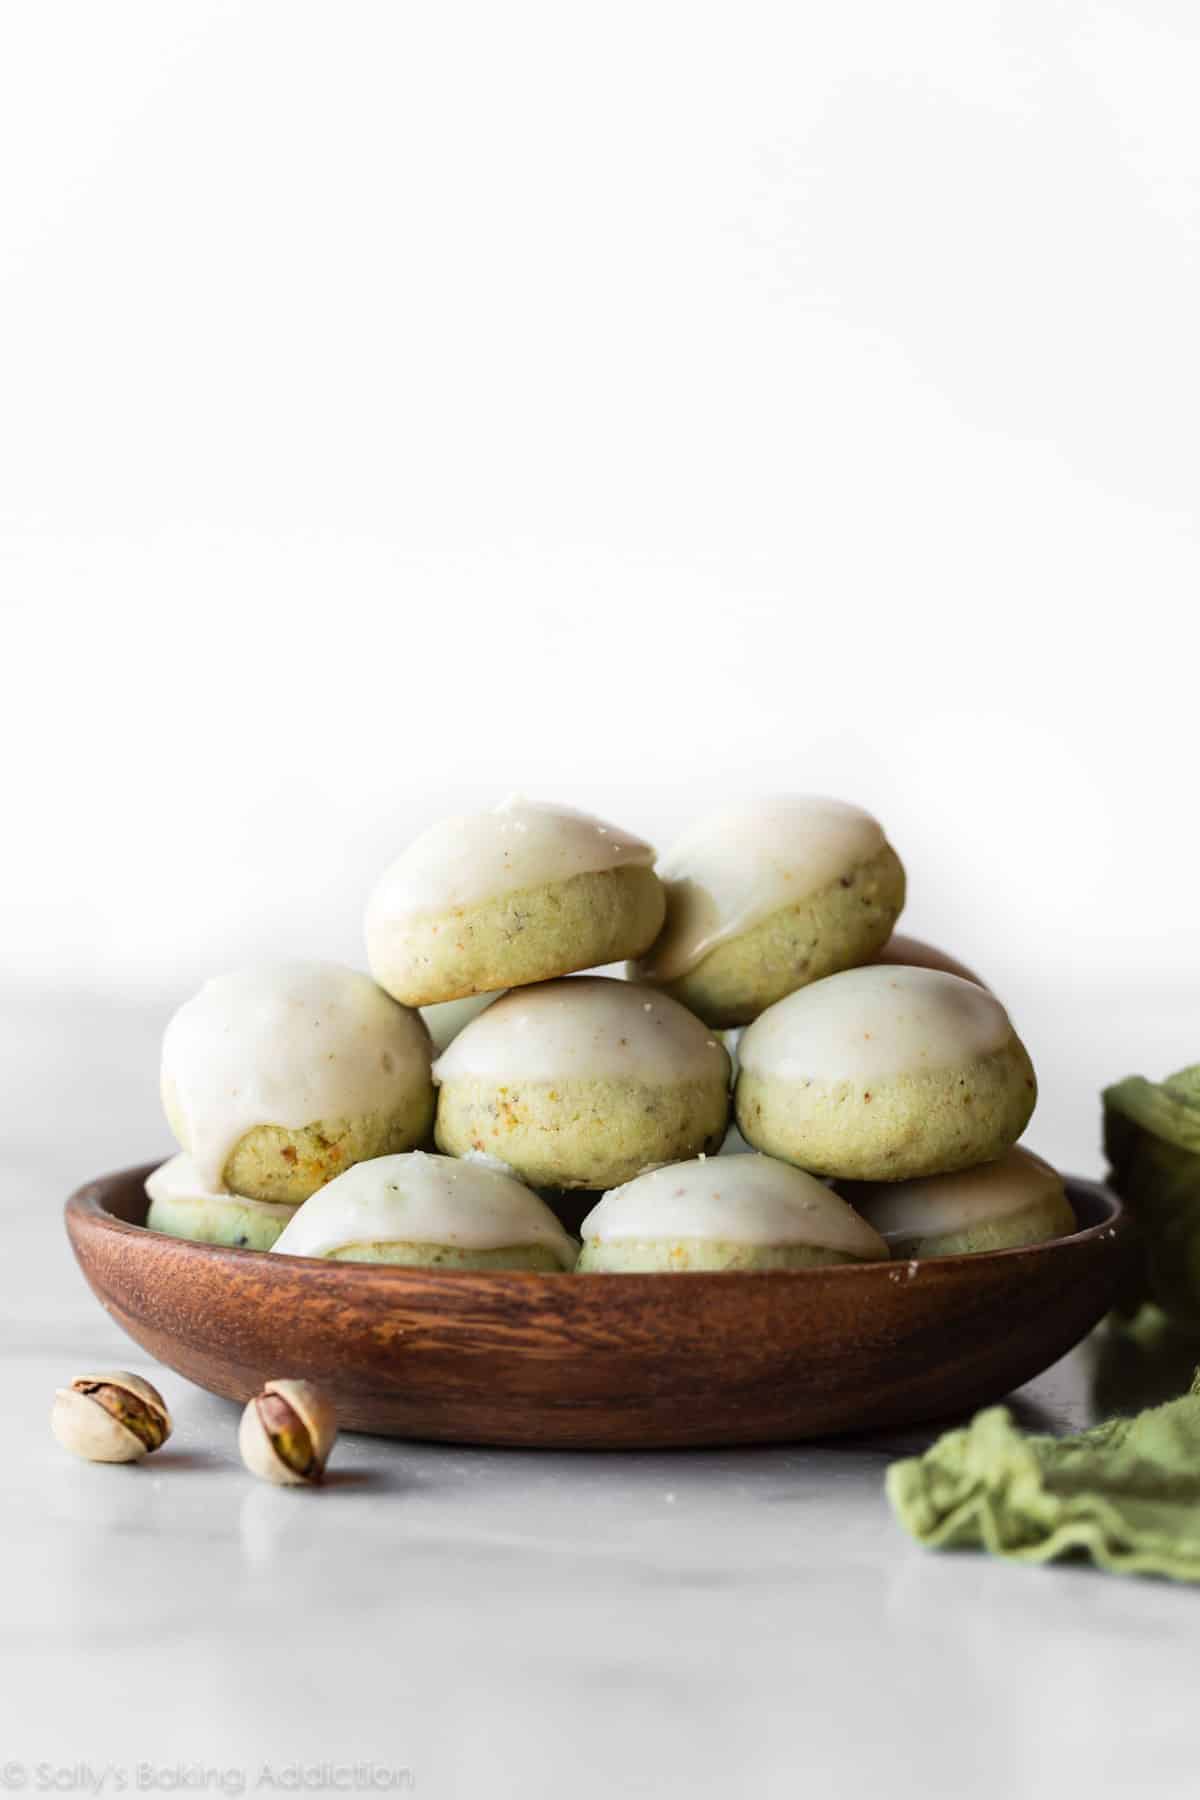 Pistachio Drop Cookies on a wooden plate.